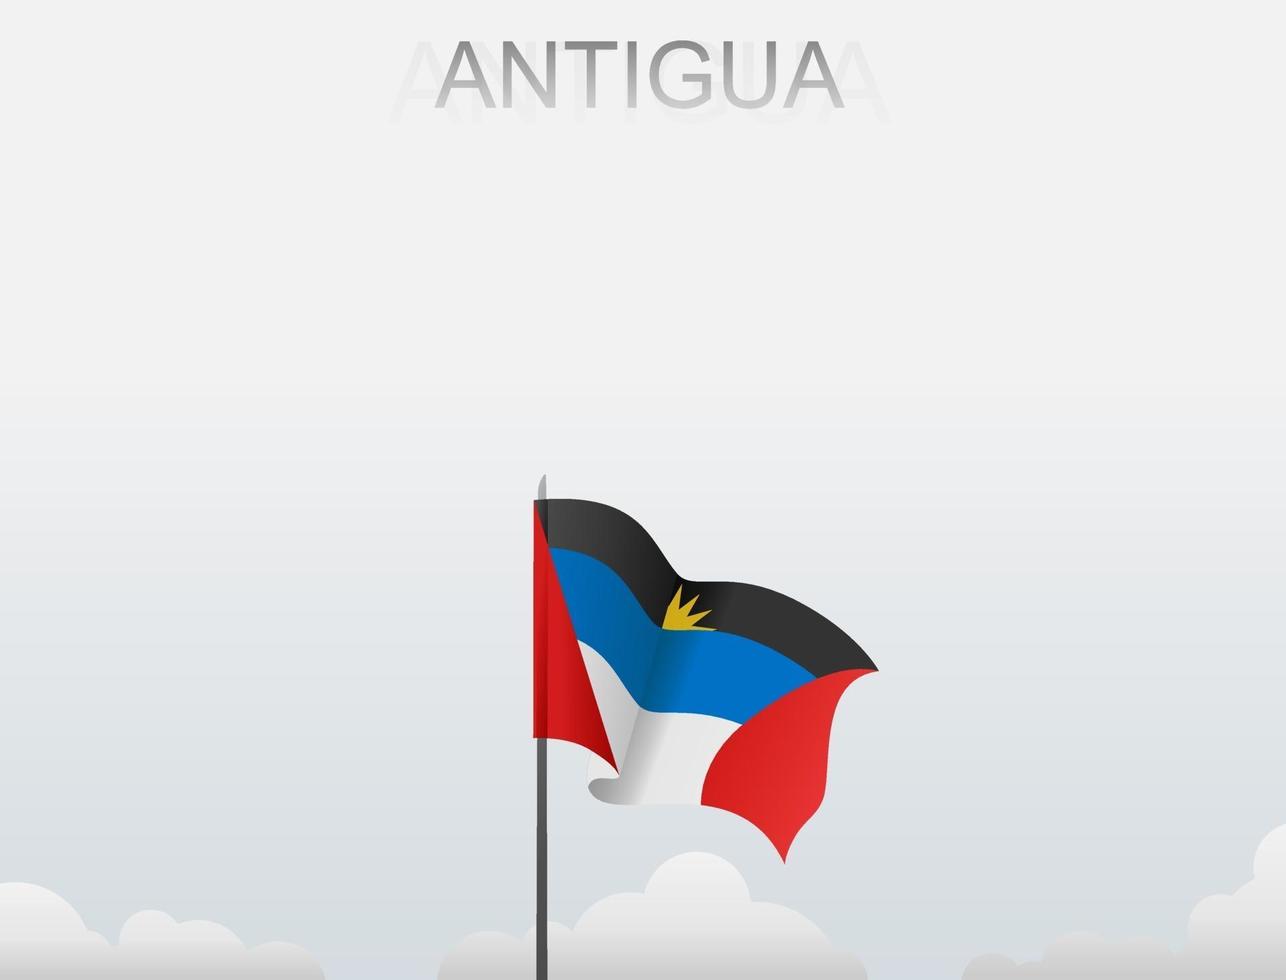 The Antigua flag is flying on a pole that stands tall under the white sky vector